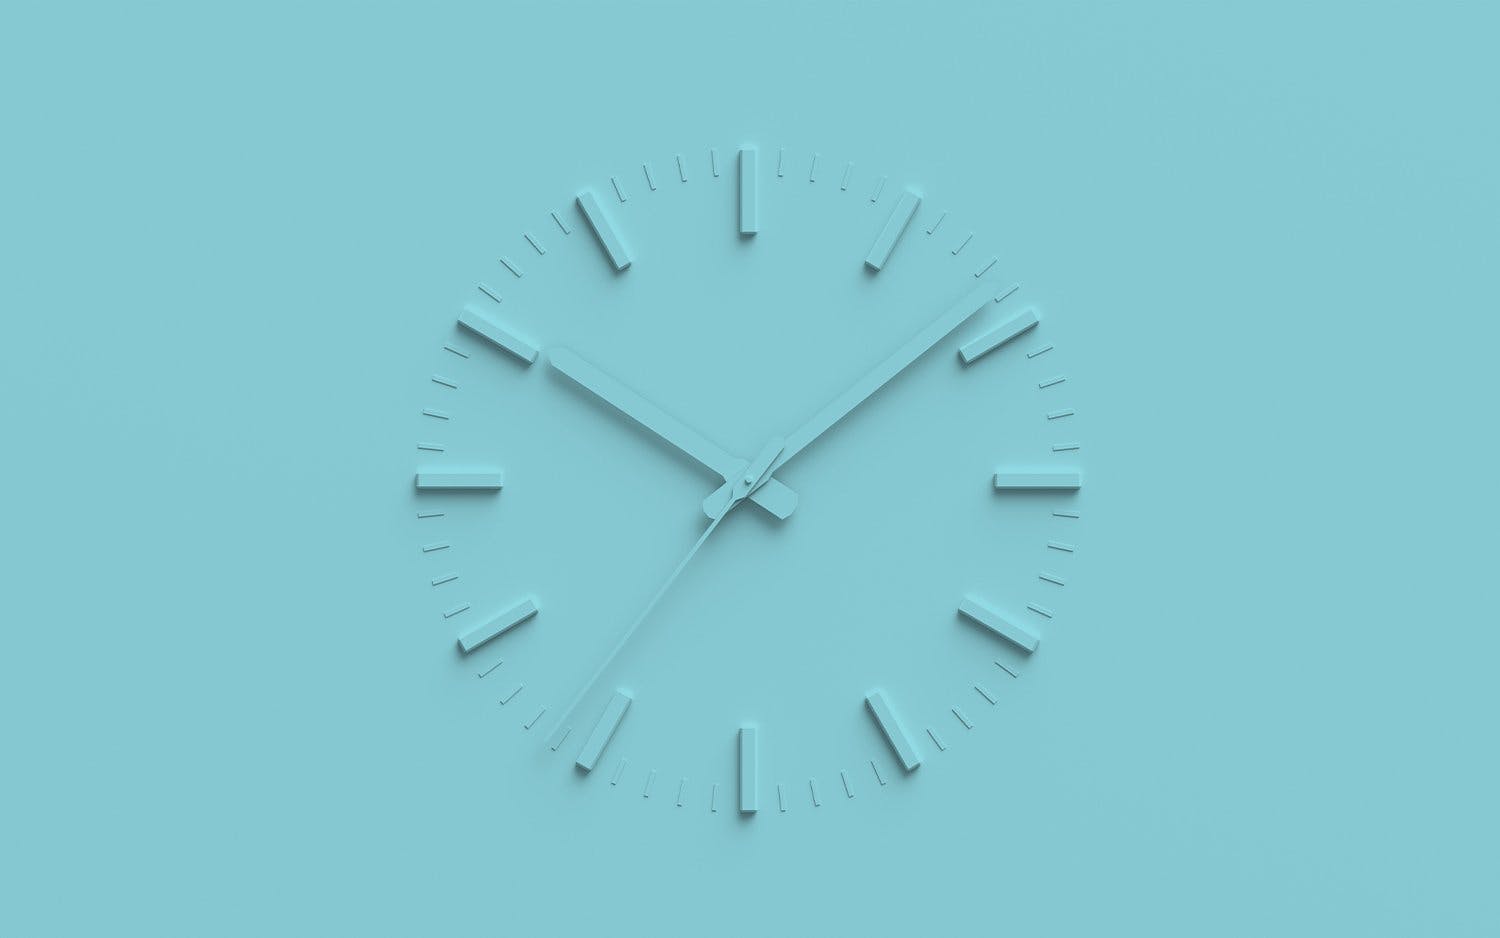 Prioritize your time in product management